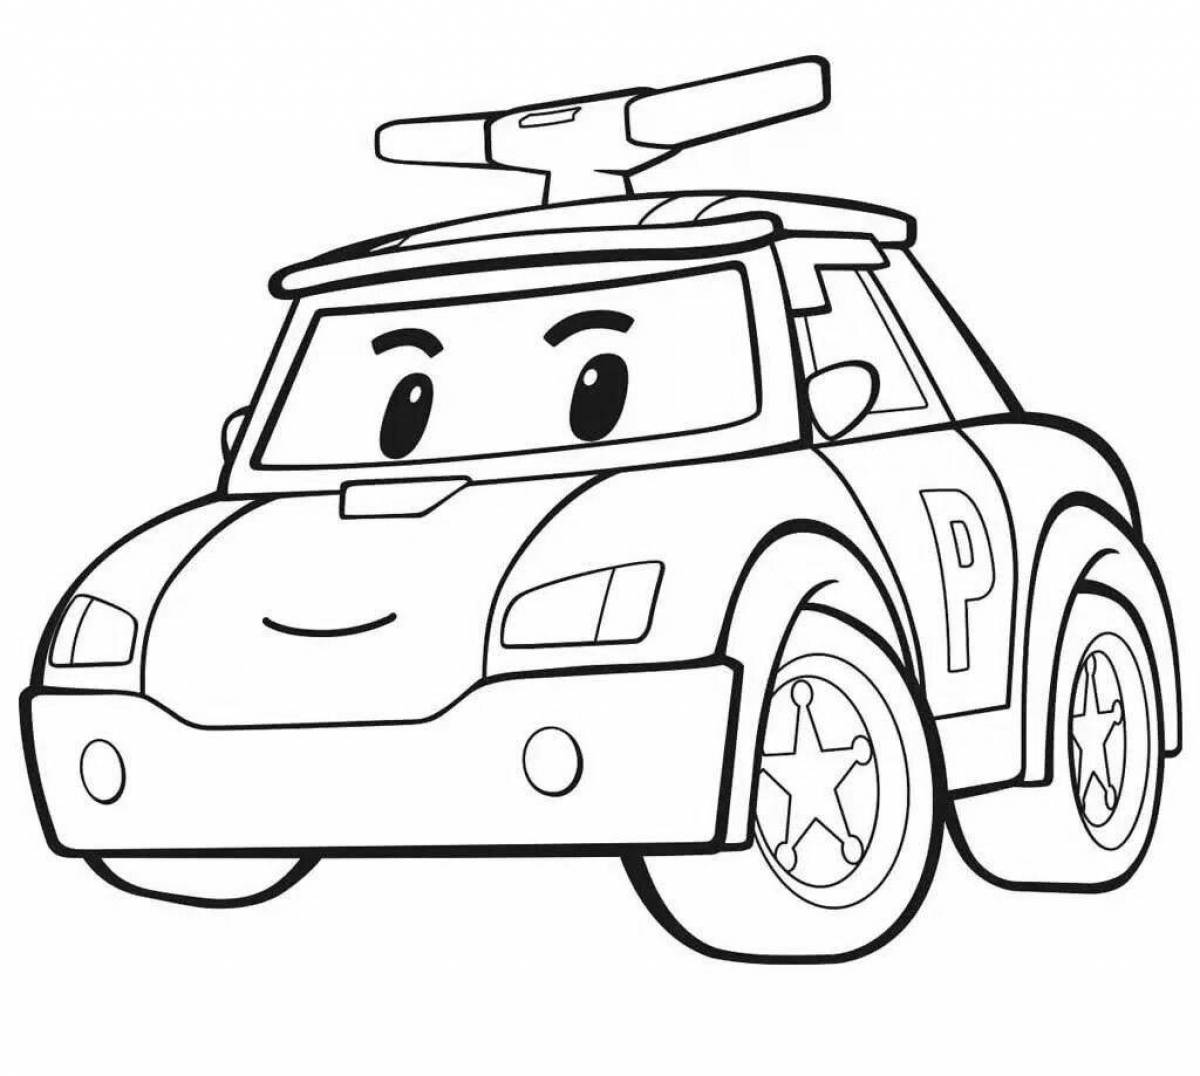 Glorious cars coloring game for boys 4-5 years old